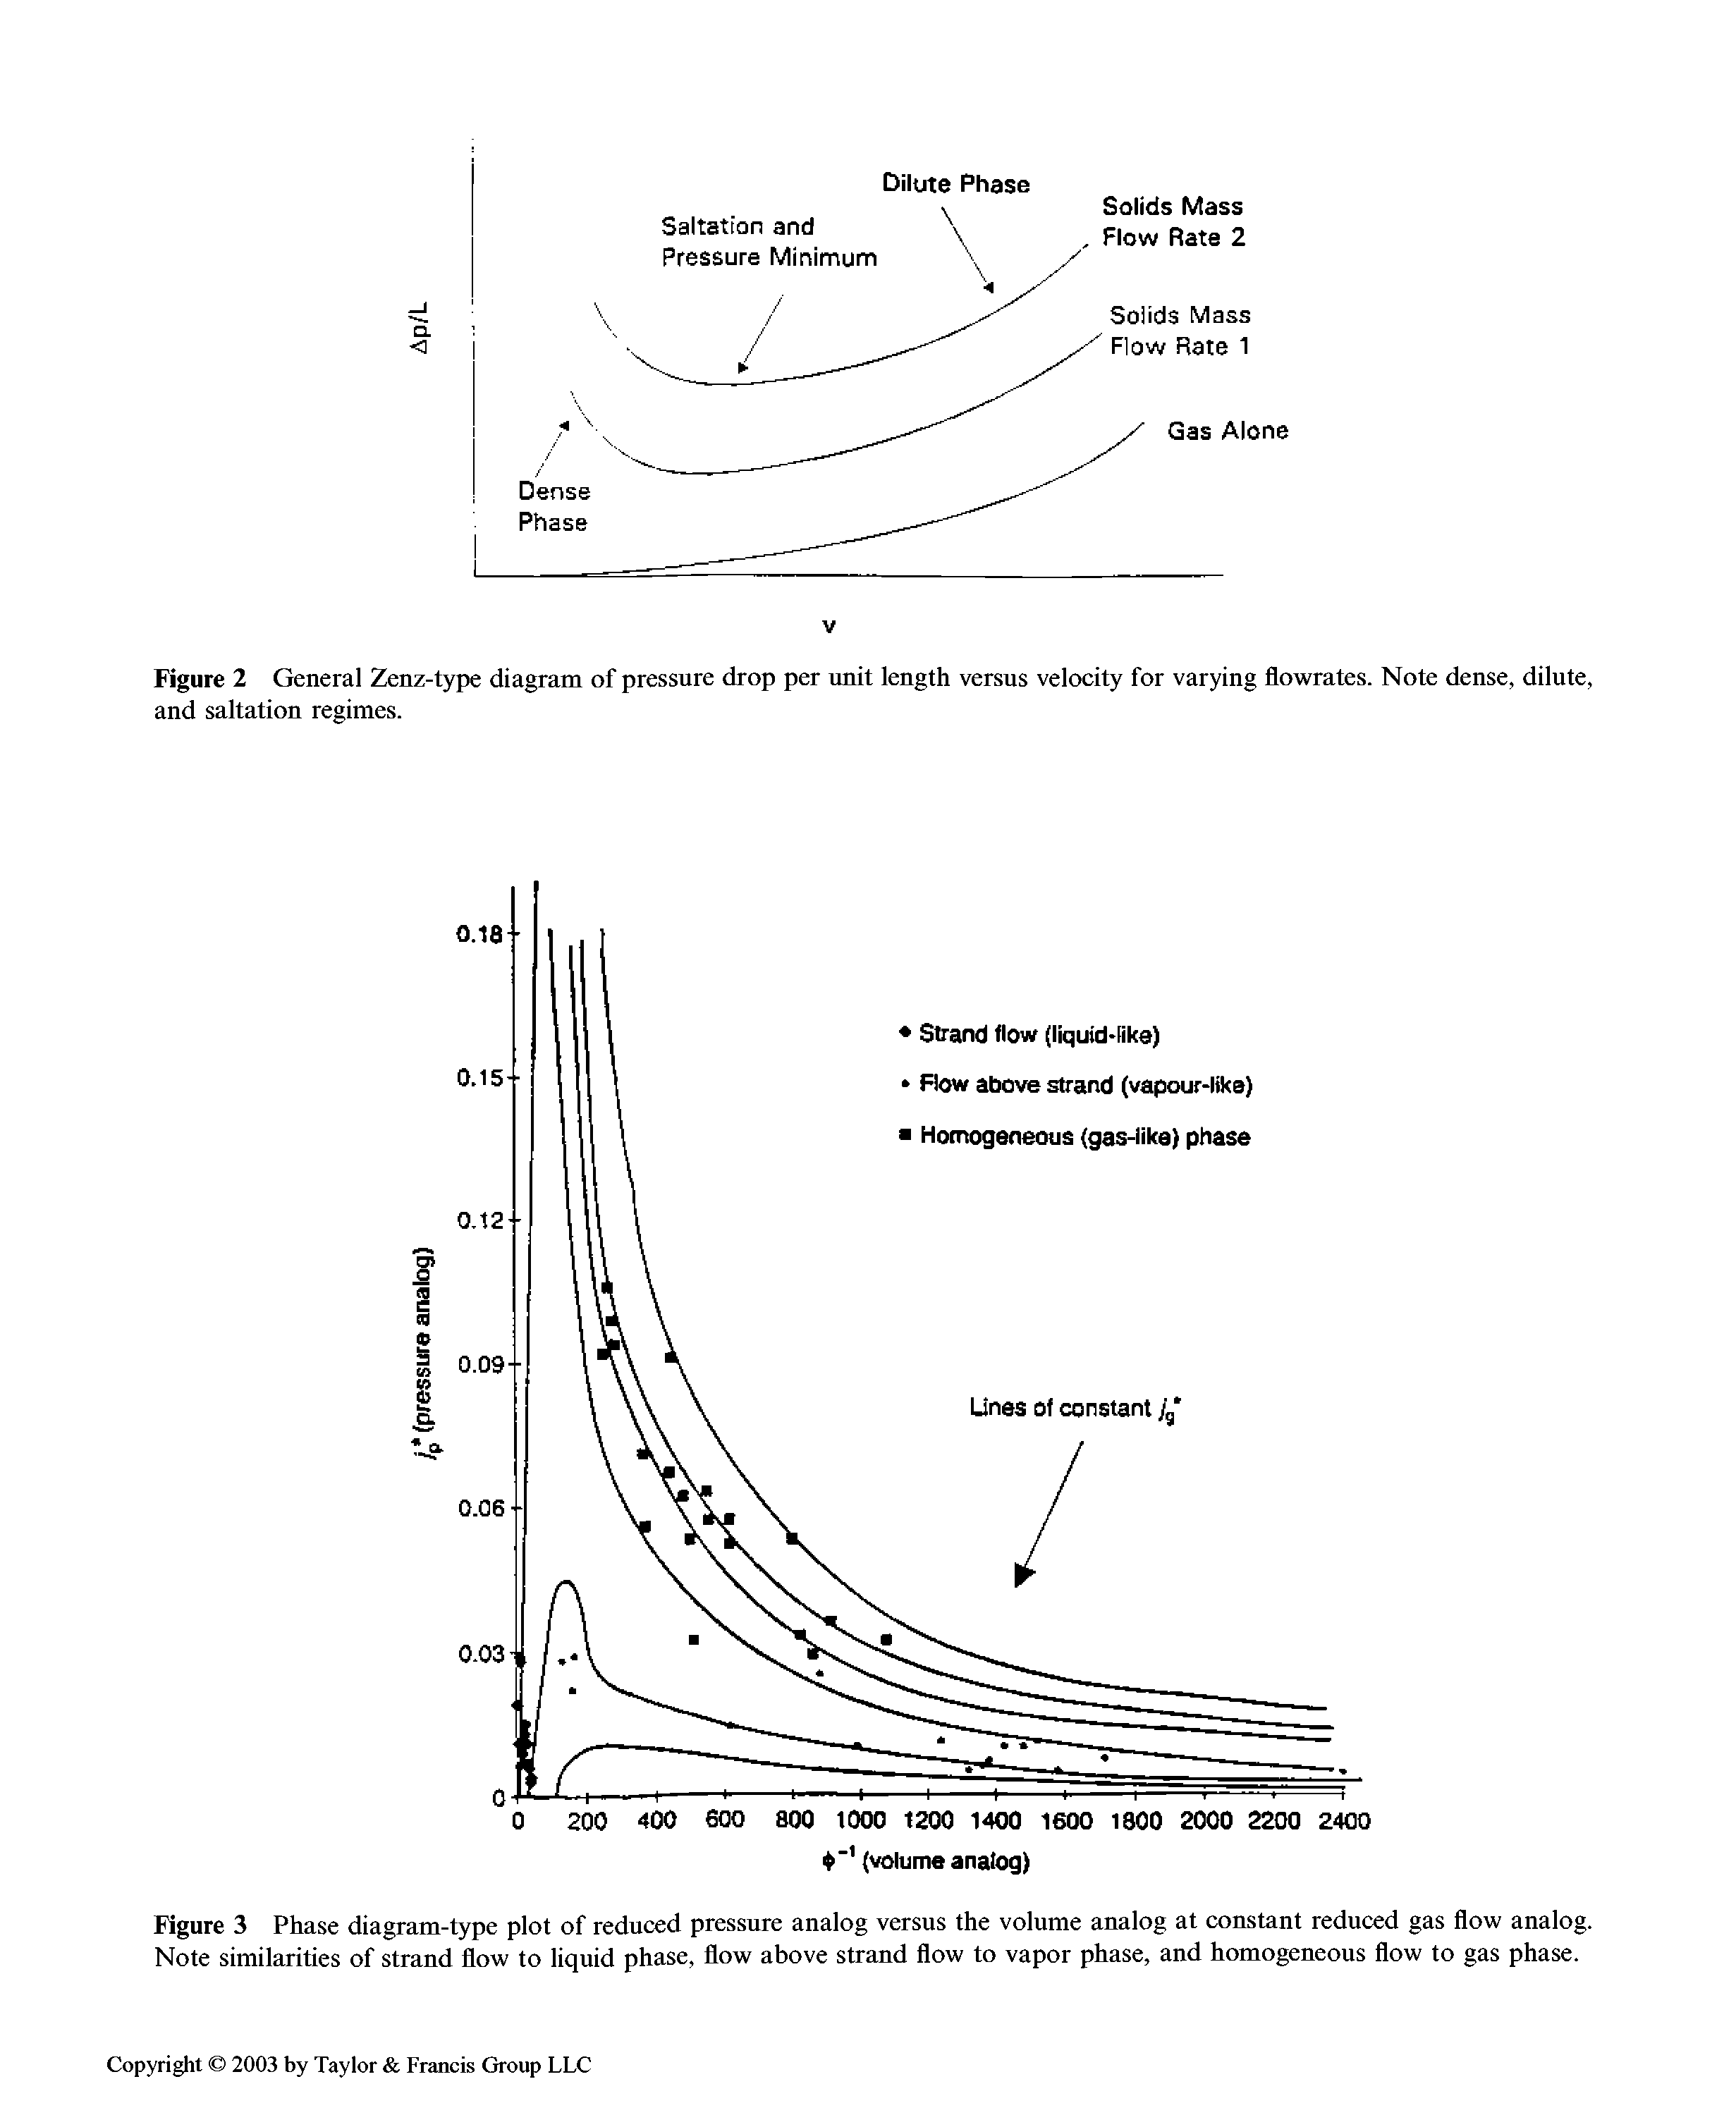 Figure 3 Phase diagram-type plot of reduced pressure analog versus the volume analog at constant reduced gas flow analog. Note similarities of strand flow to liquid phase, flow above strand flow to vapor phase, and homogeneous flow to gas phase.